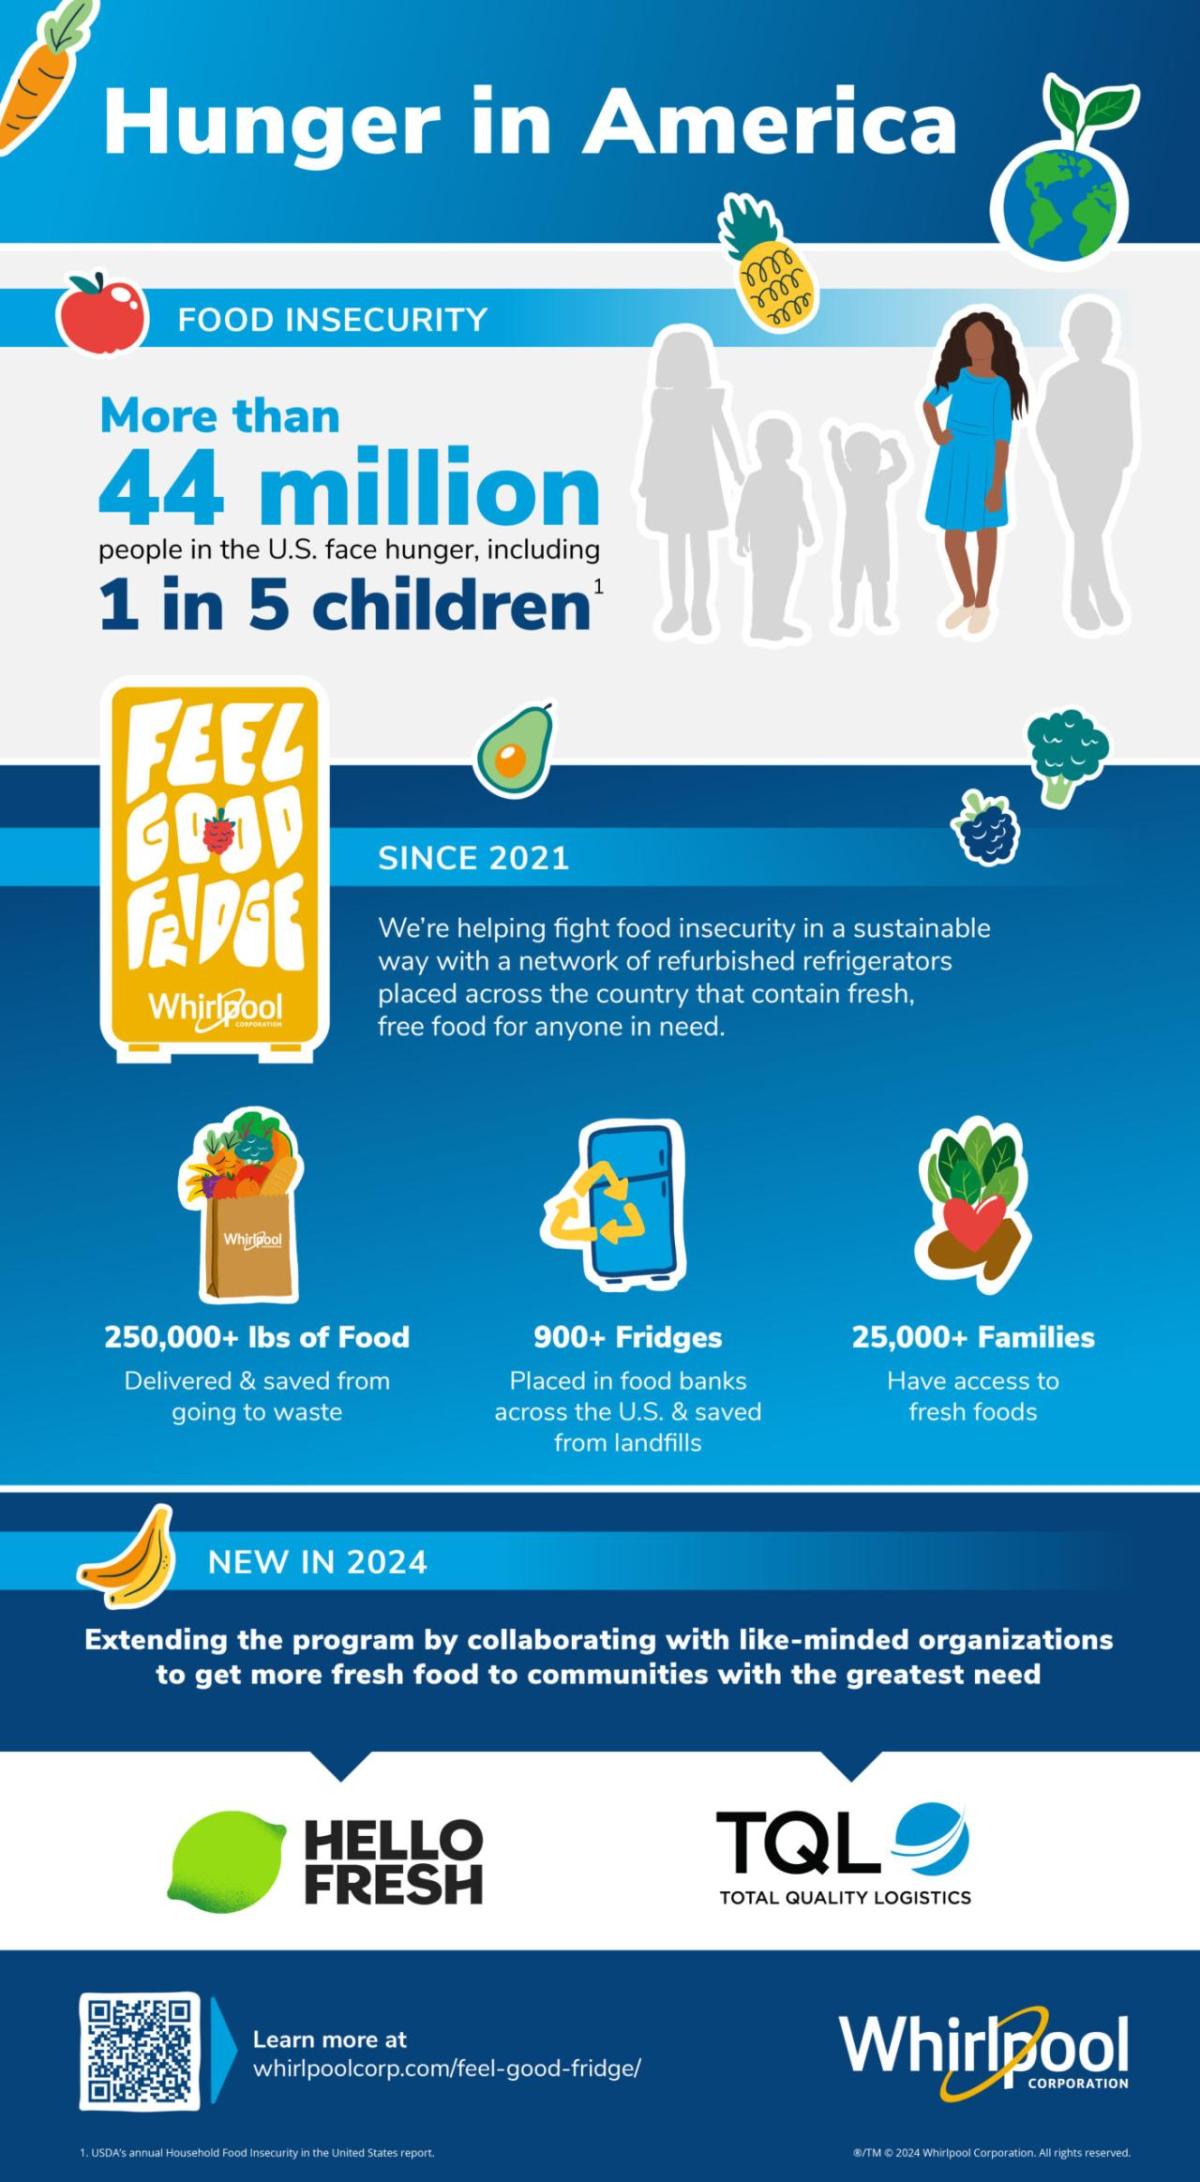 Info graphic "Hunger in America" statistics on food insecurity since 2021.